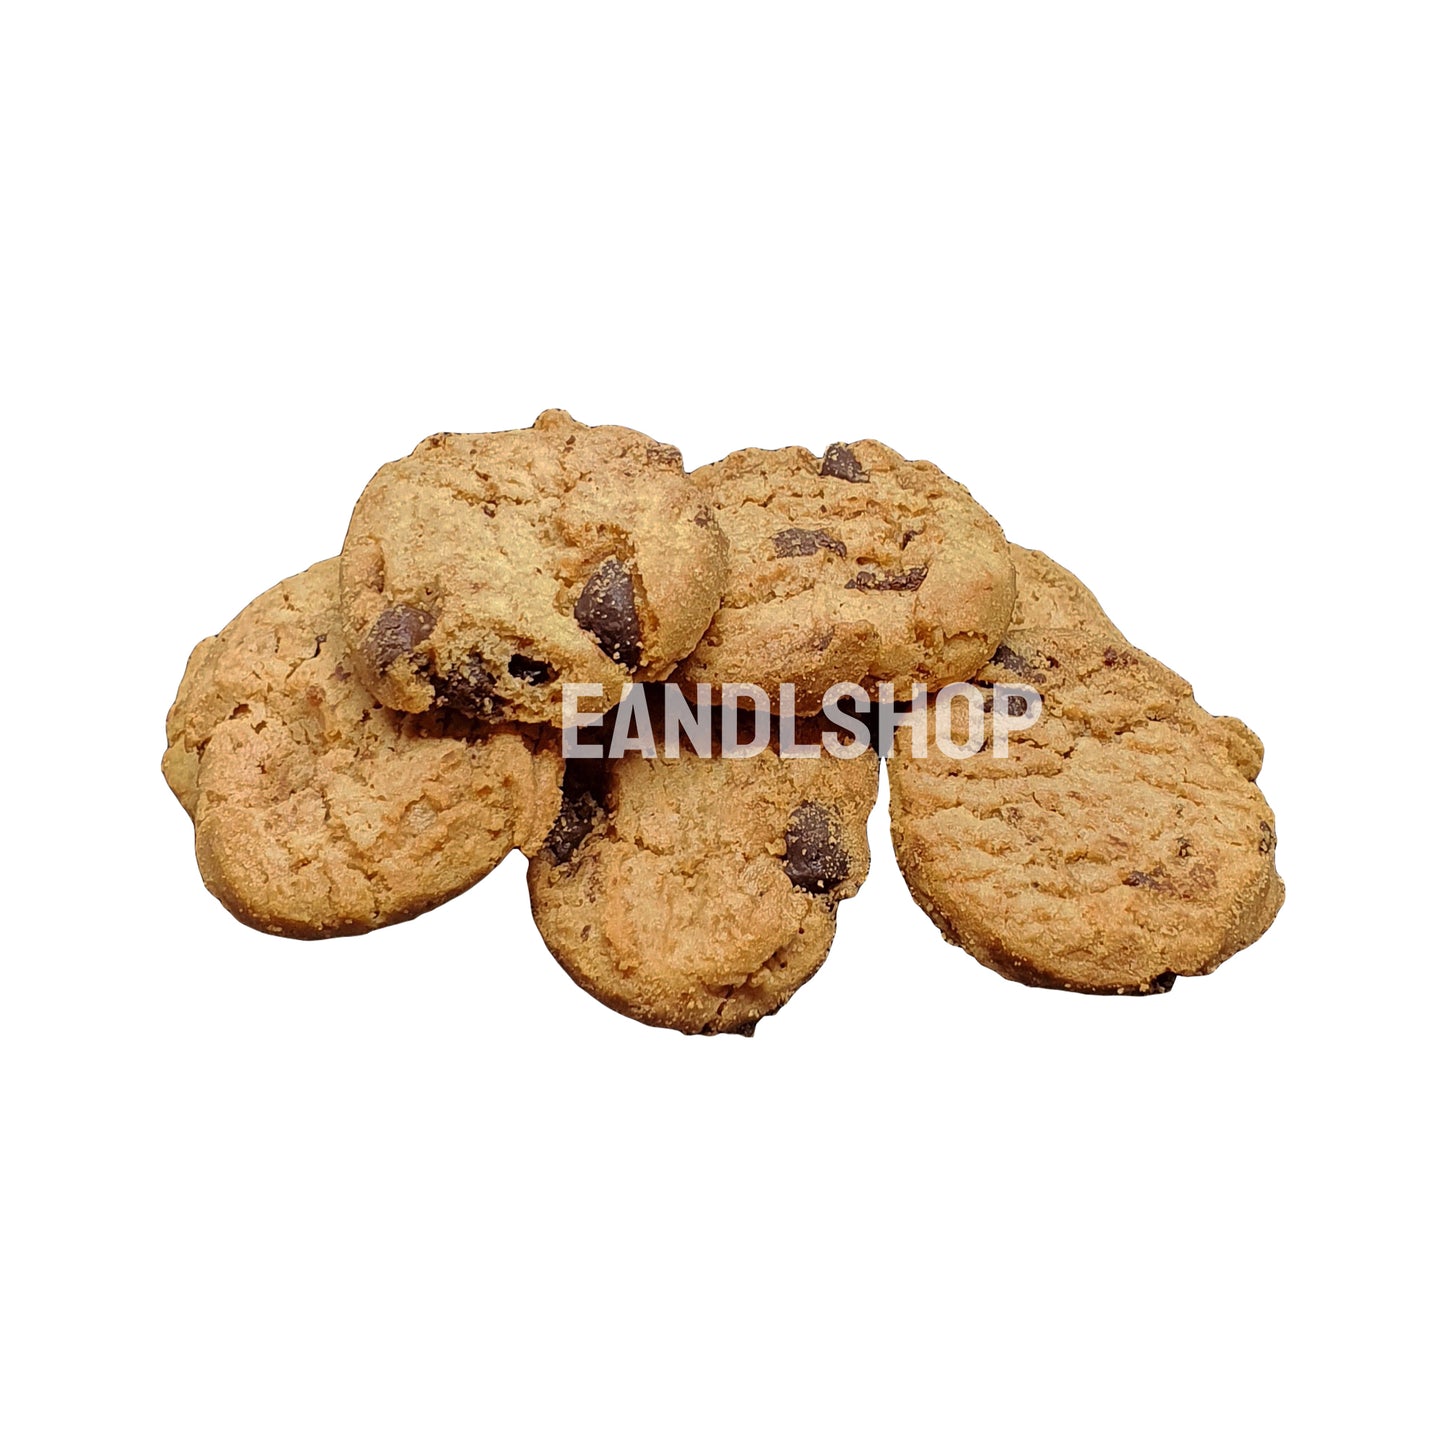 Mini Chocolate Chip Cookies. Old-school biscuits, modern snacks (chips, crackers), cakes, gummies, plums, dried fruits, nuts, herbal tea – available at www.EANDLSHOP.com